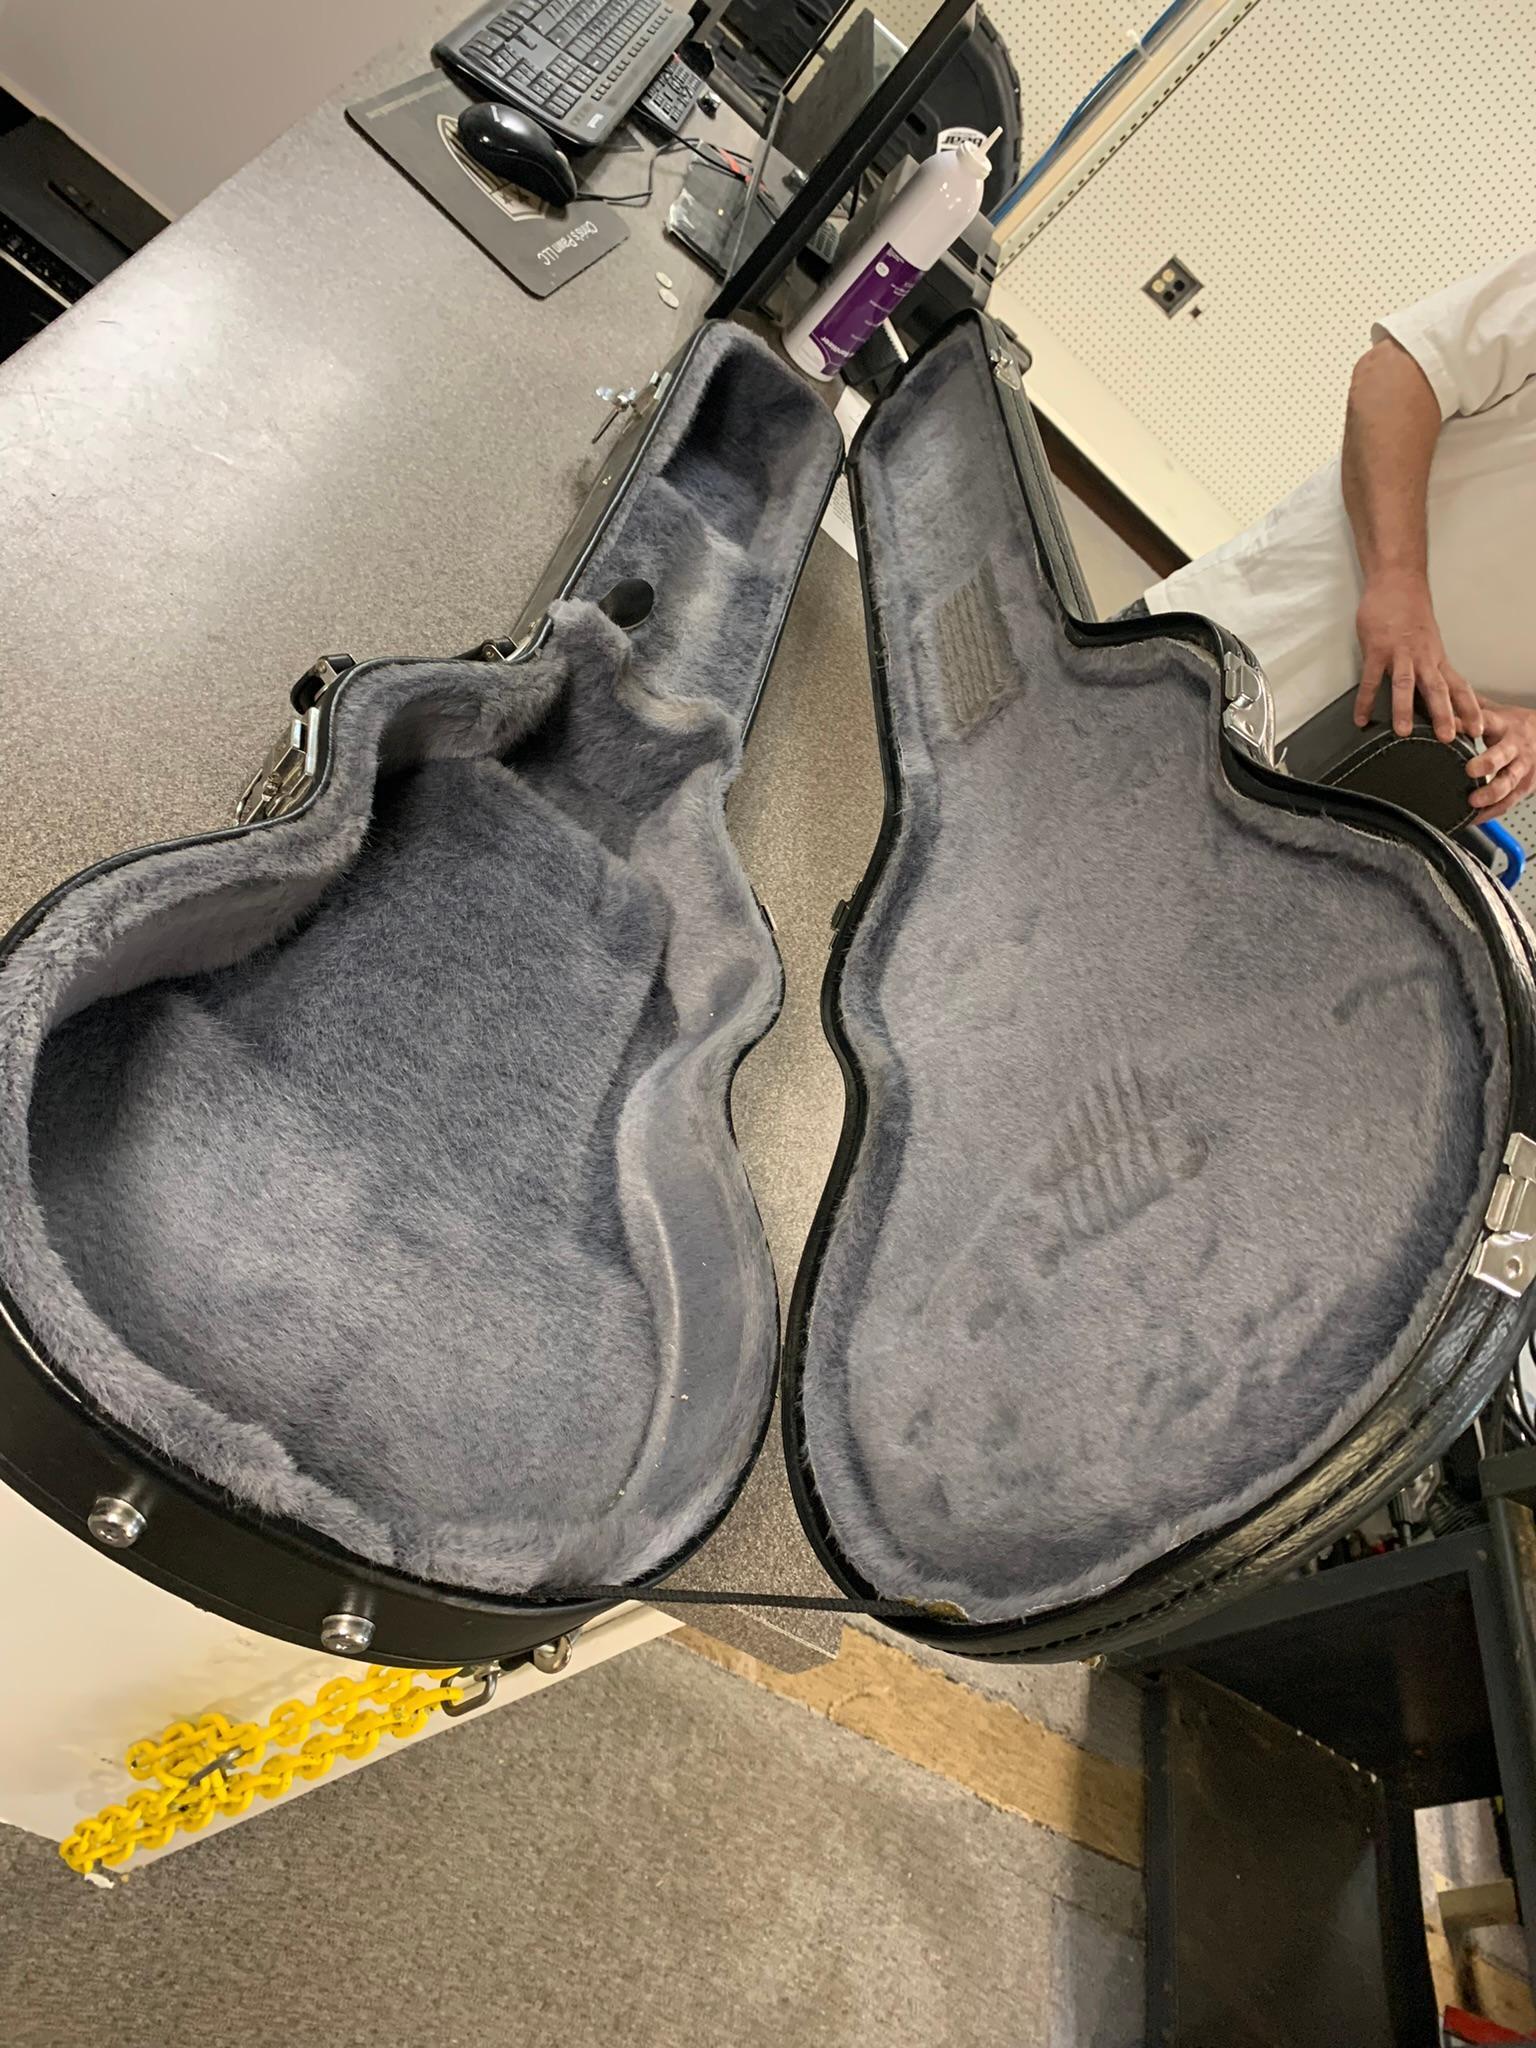 Group of Guitar Cases